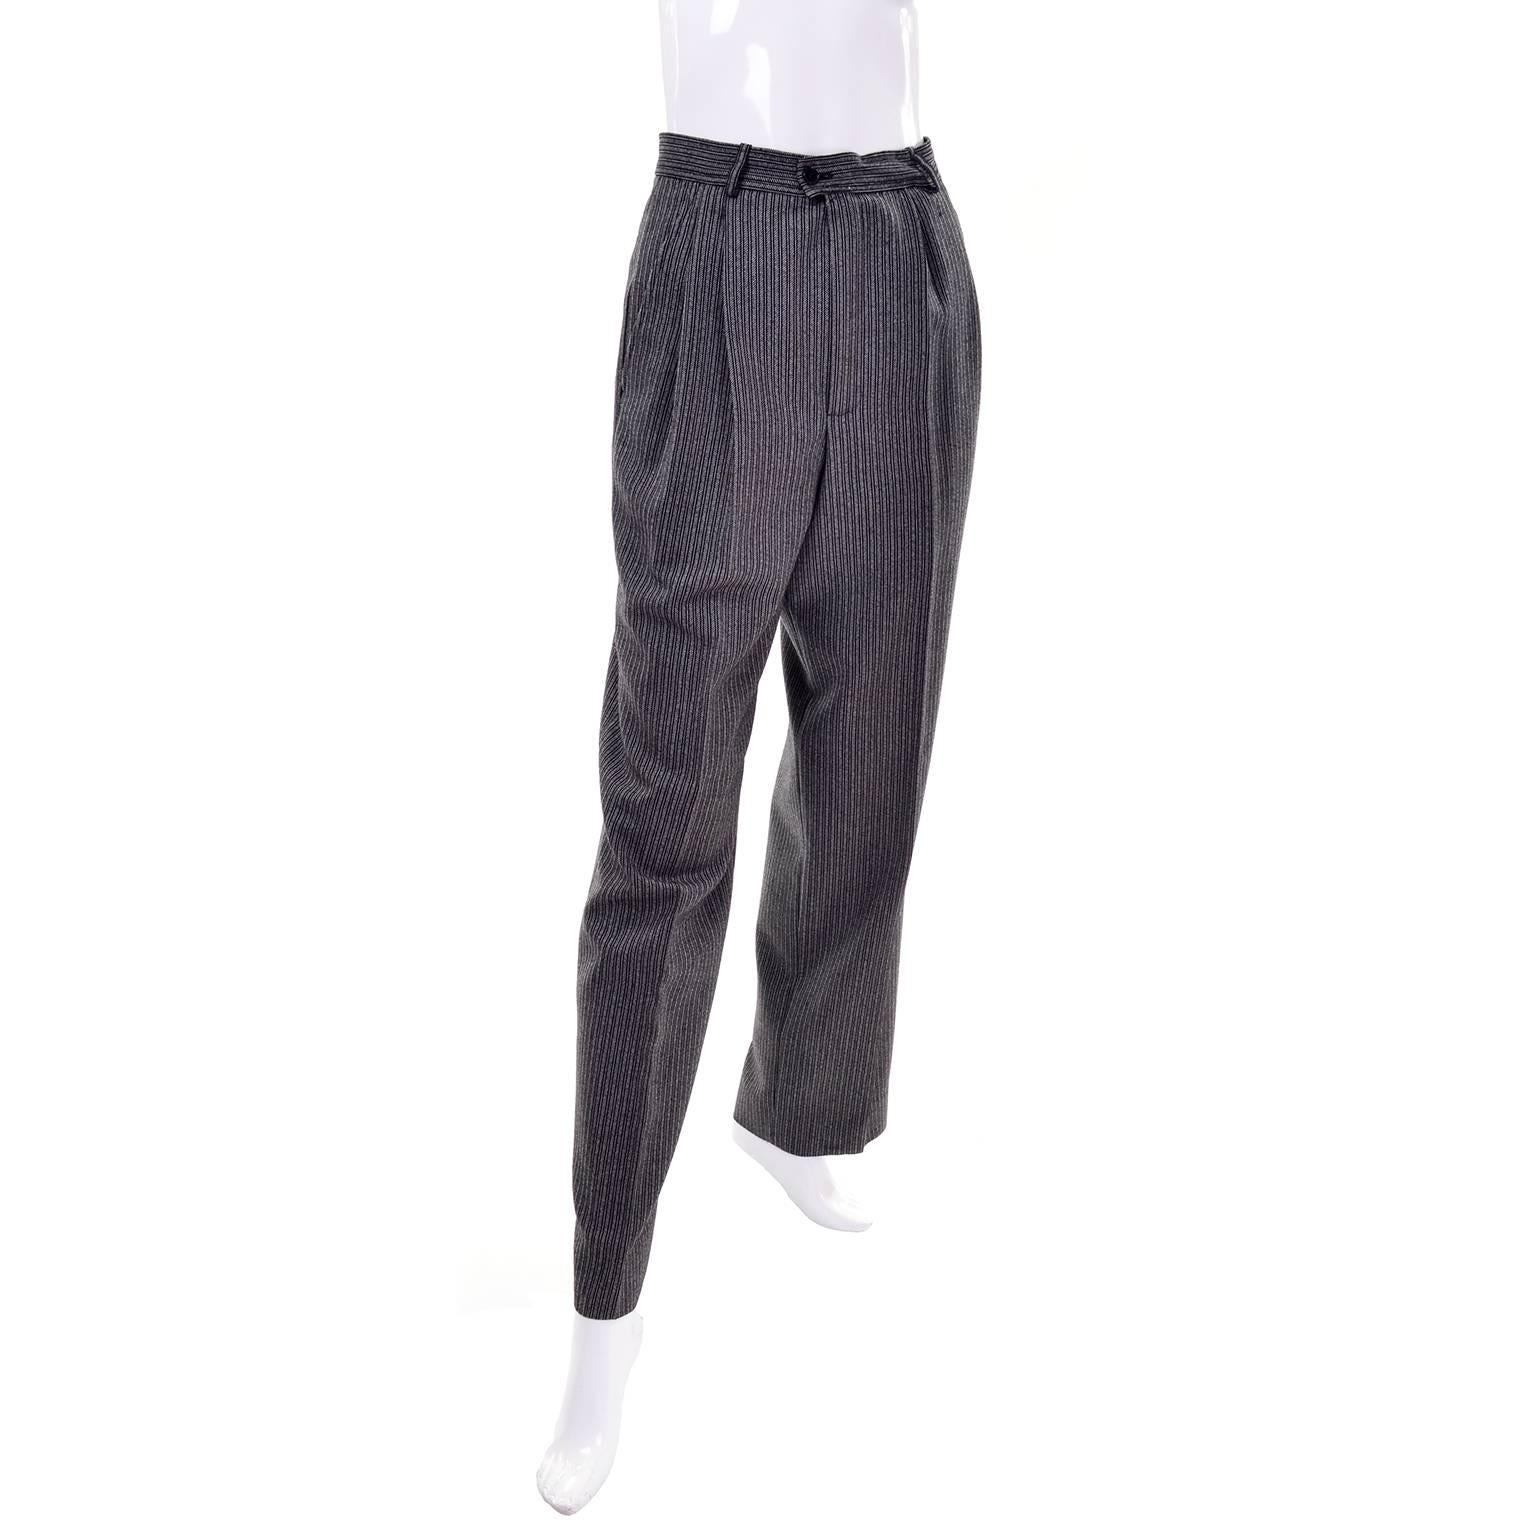 These vintage YSL Rive Gauche gray and black pinstripe wool pants are high waisted and have side slit pockets. The pants are in excellent condition and have slight pleats. These pants fit our mannequin to a T so we estimate them to be a modern day